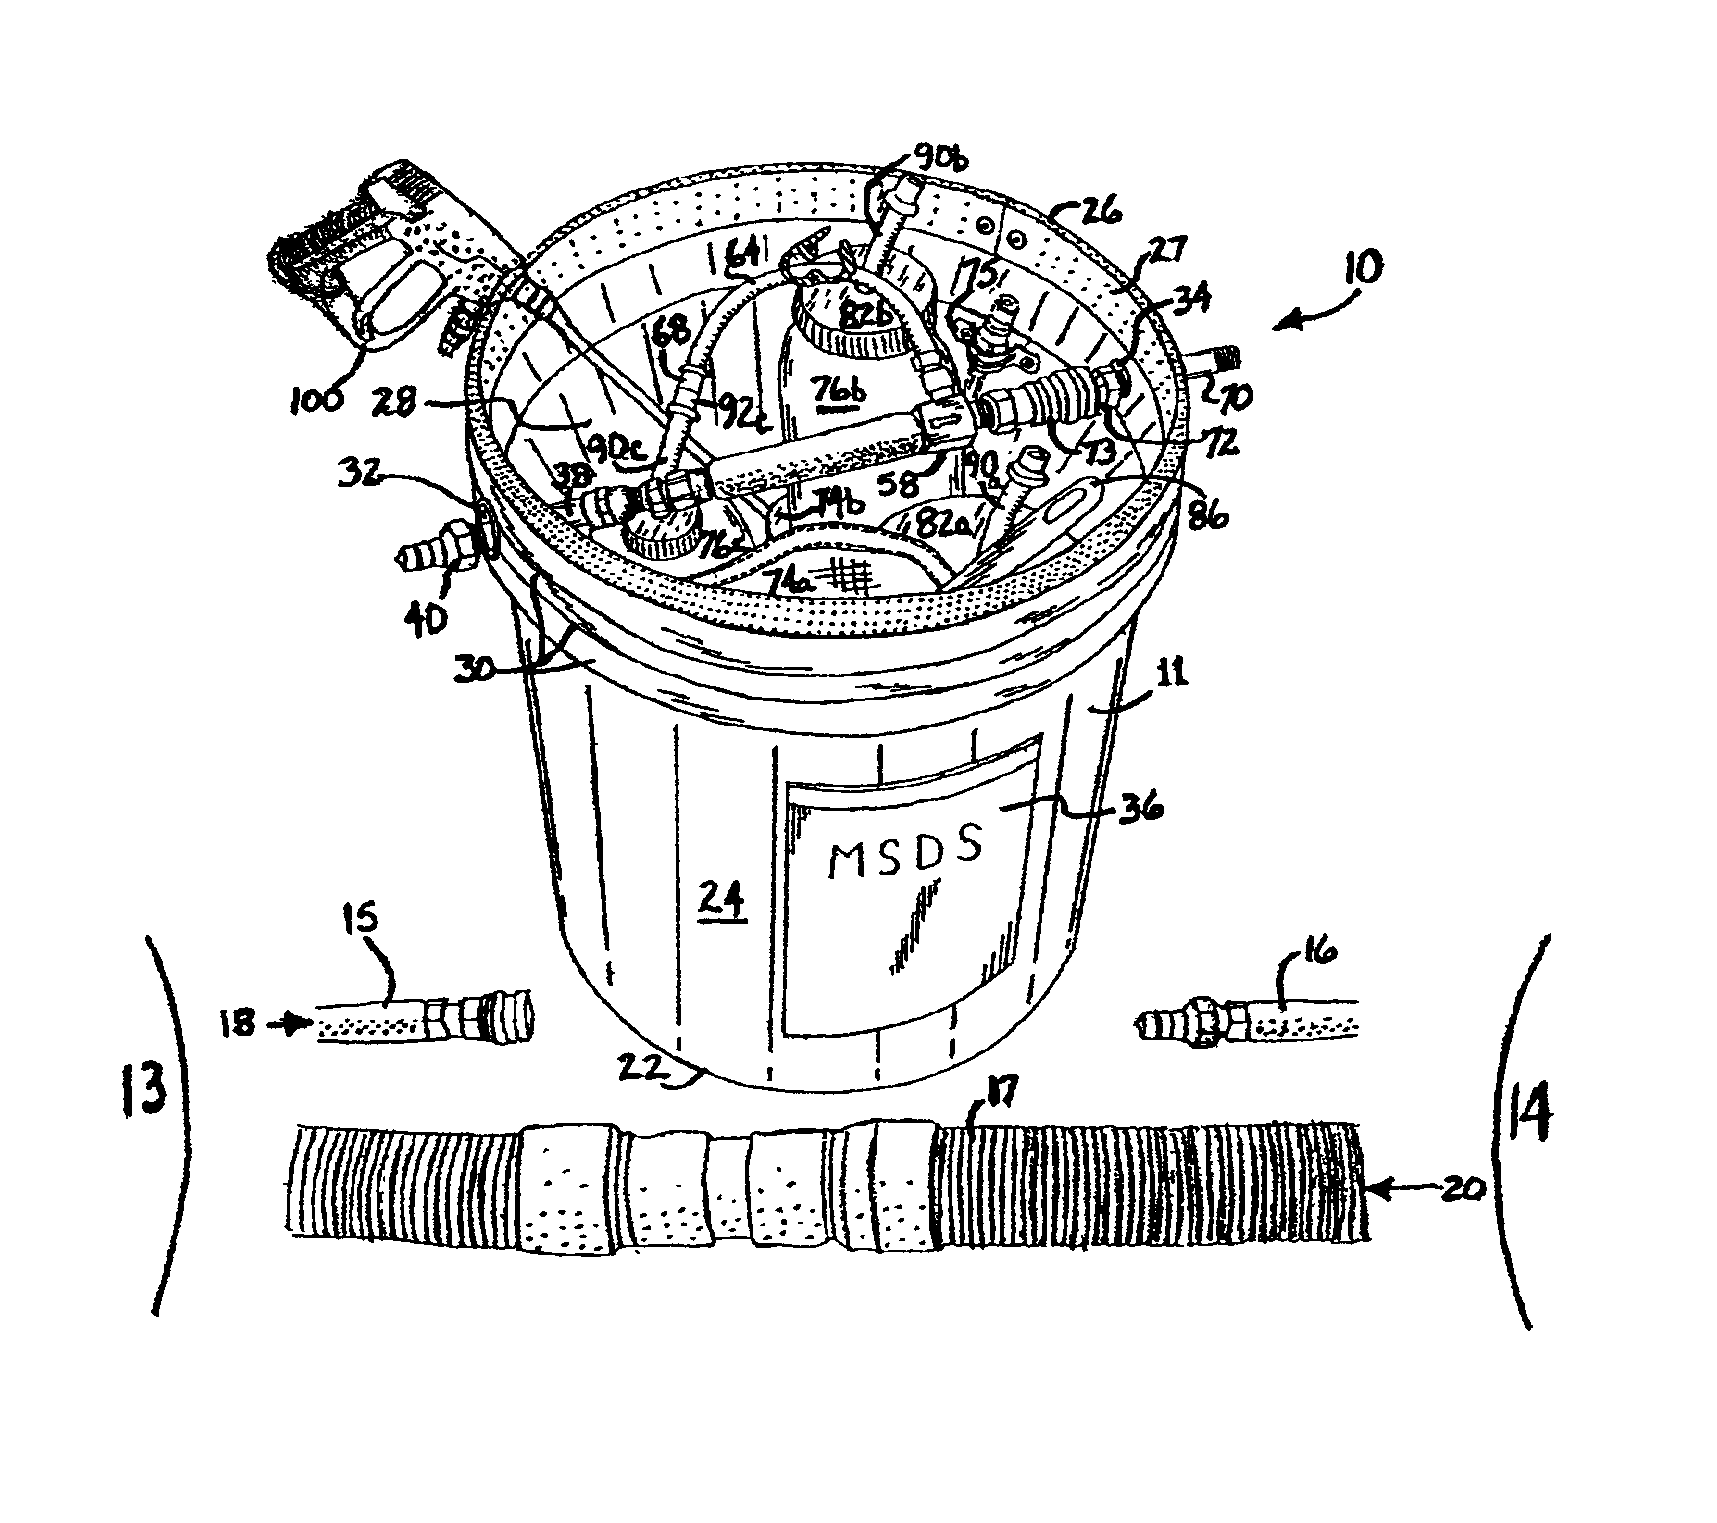 Spray caddy and method of dispensing chemicals